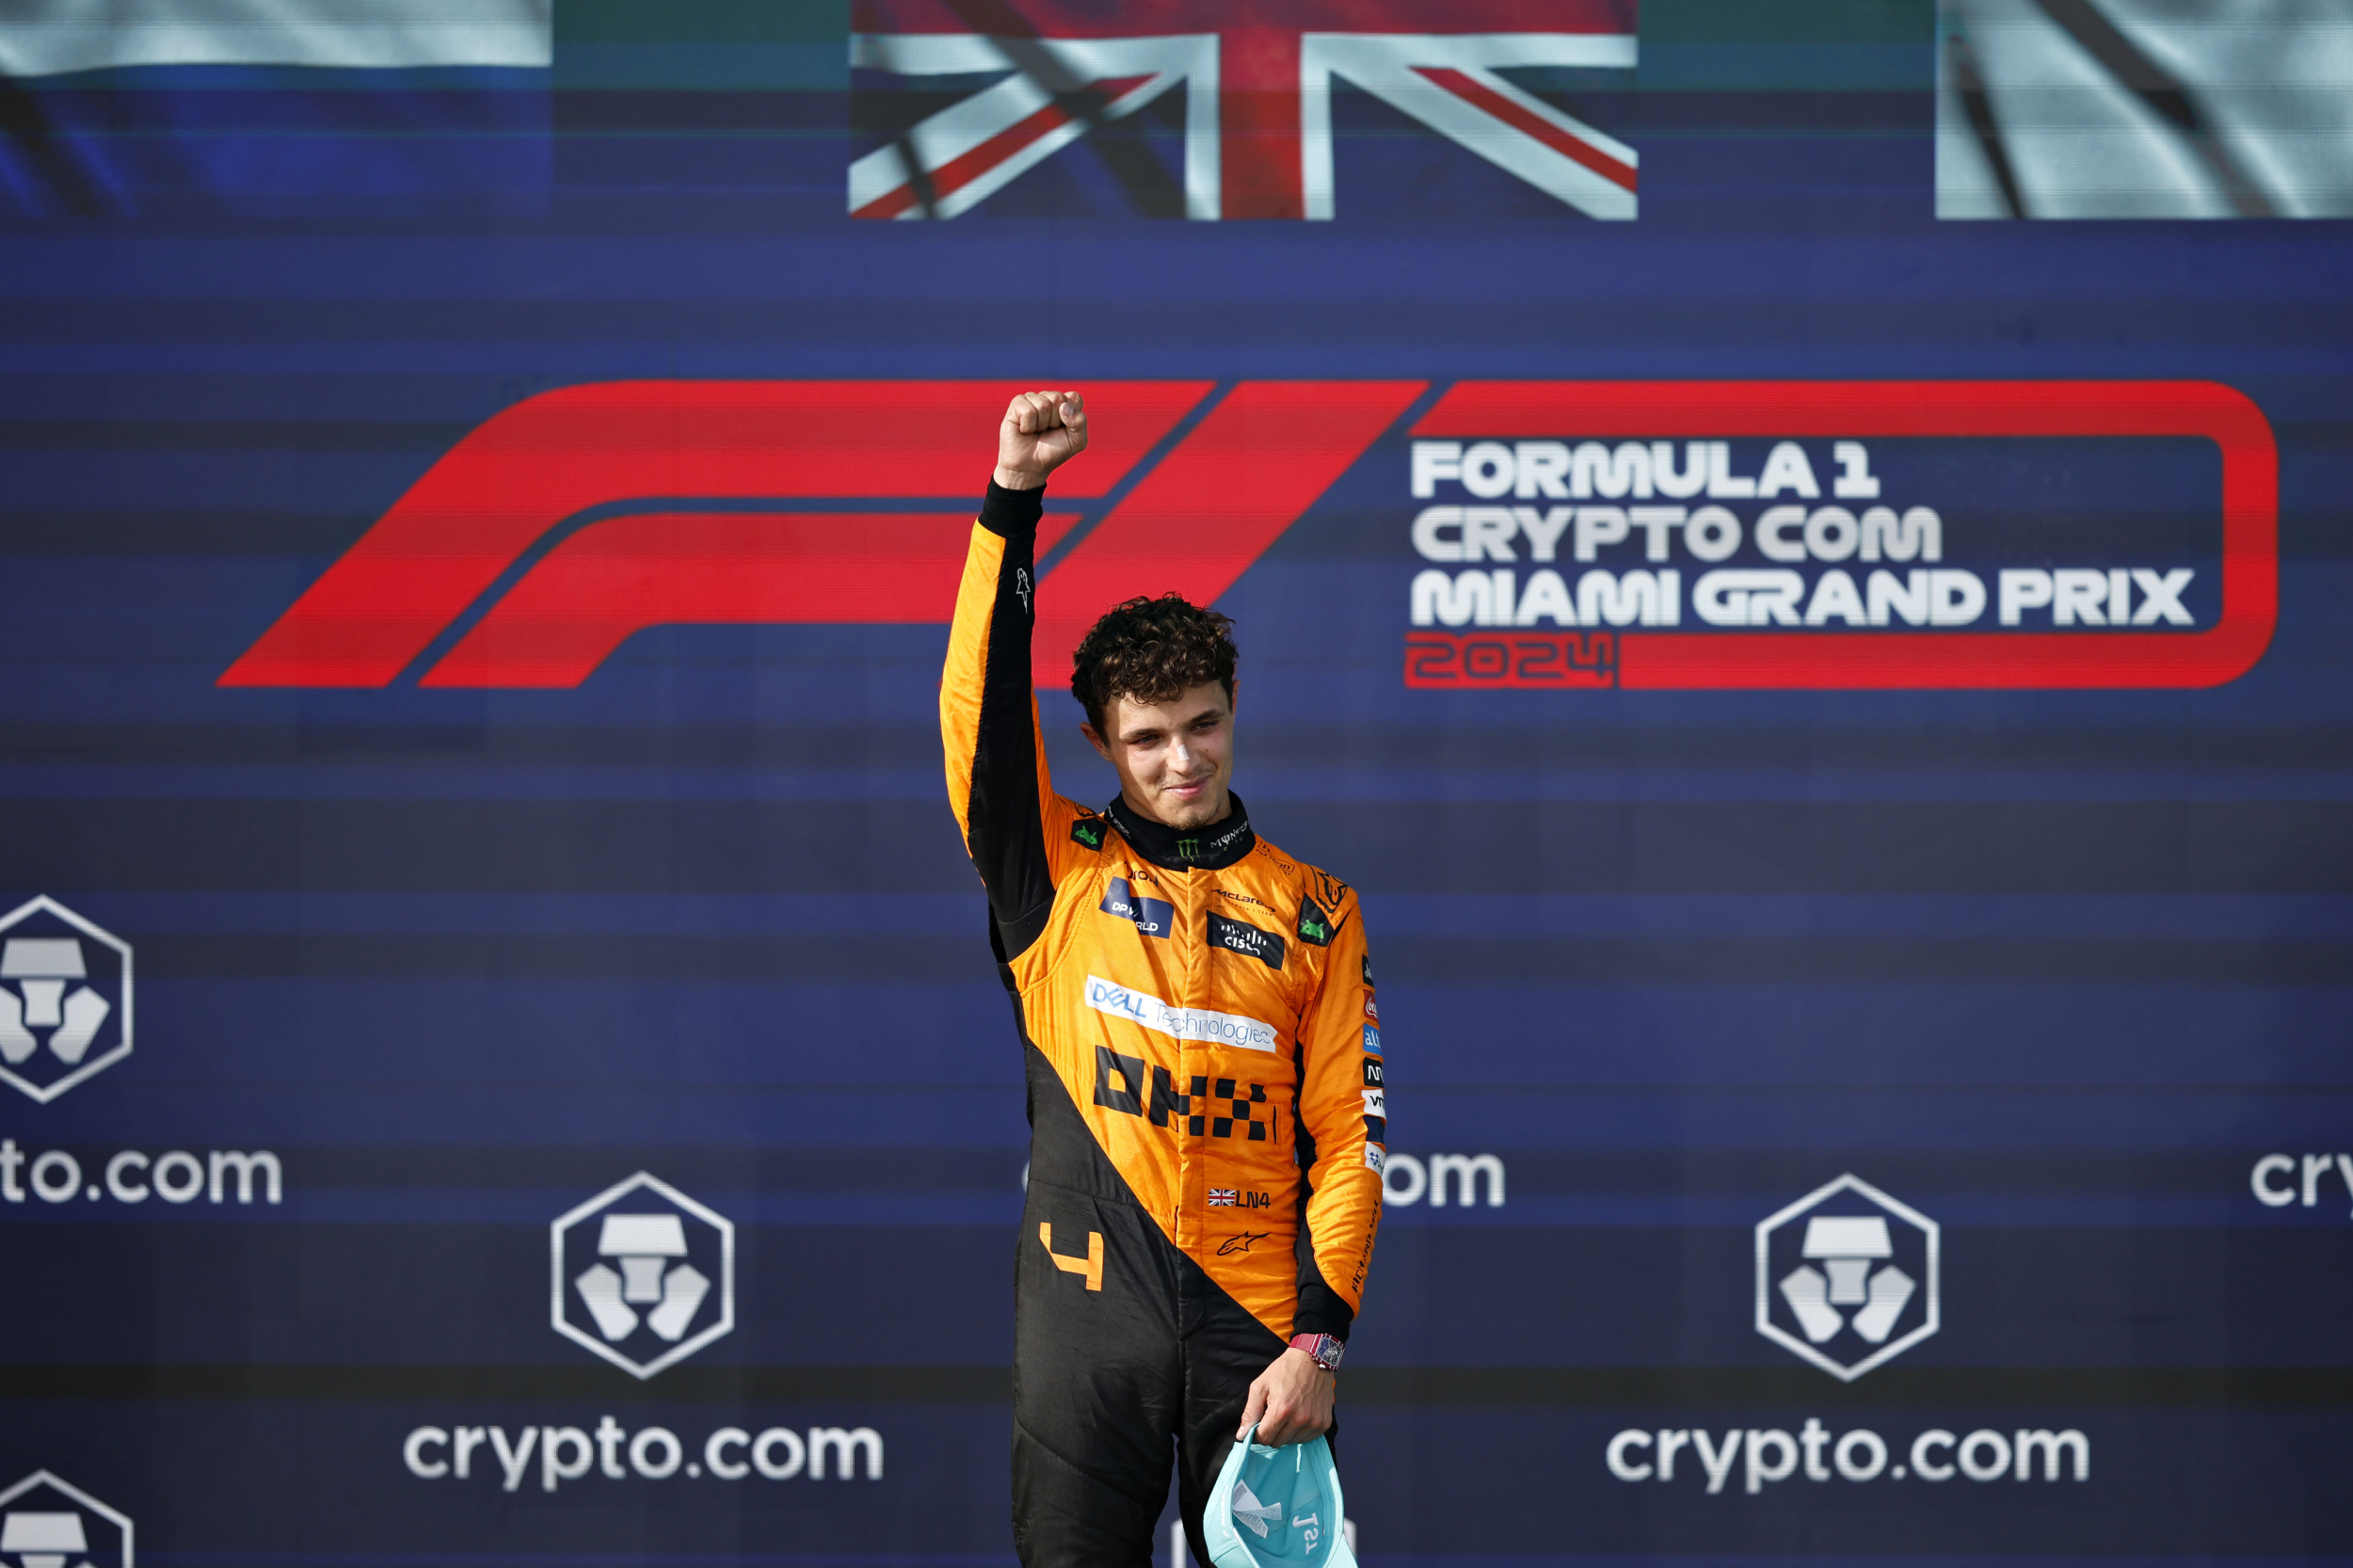 Lando Norris jokes about more injuries from his Miami GP celebrations